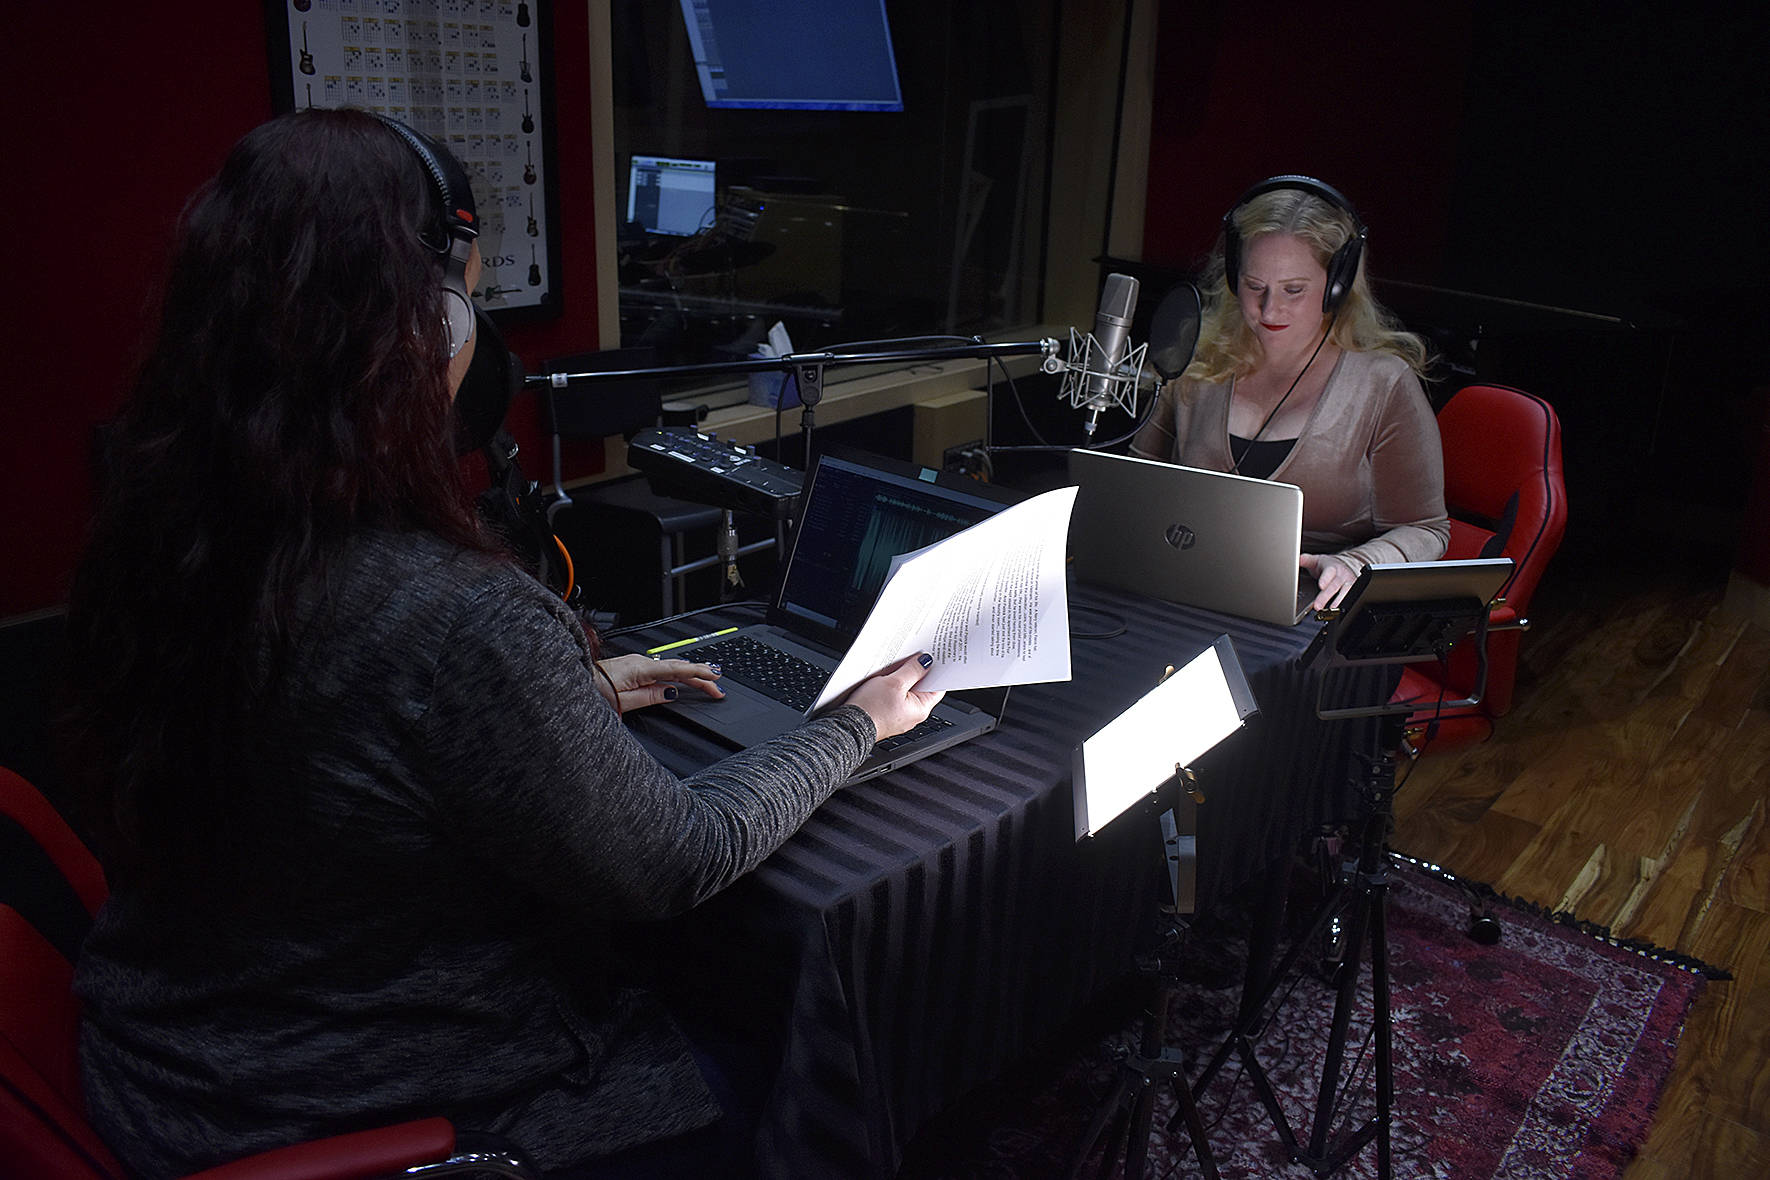 Photo by Haley Ausbun. Kim Shepard (left) and Carolyn Ossorio (right) launched a new true crime podcast, recorded at a sleek studio in Coal Creek. Ossorio is a former Renton Reporter columnist and both hosts previously worked at KIRO radio.